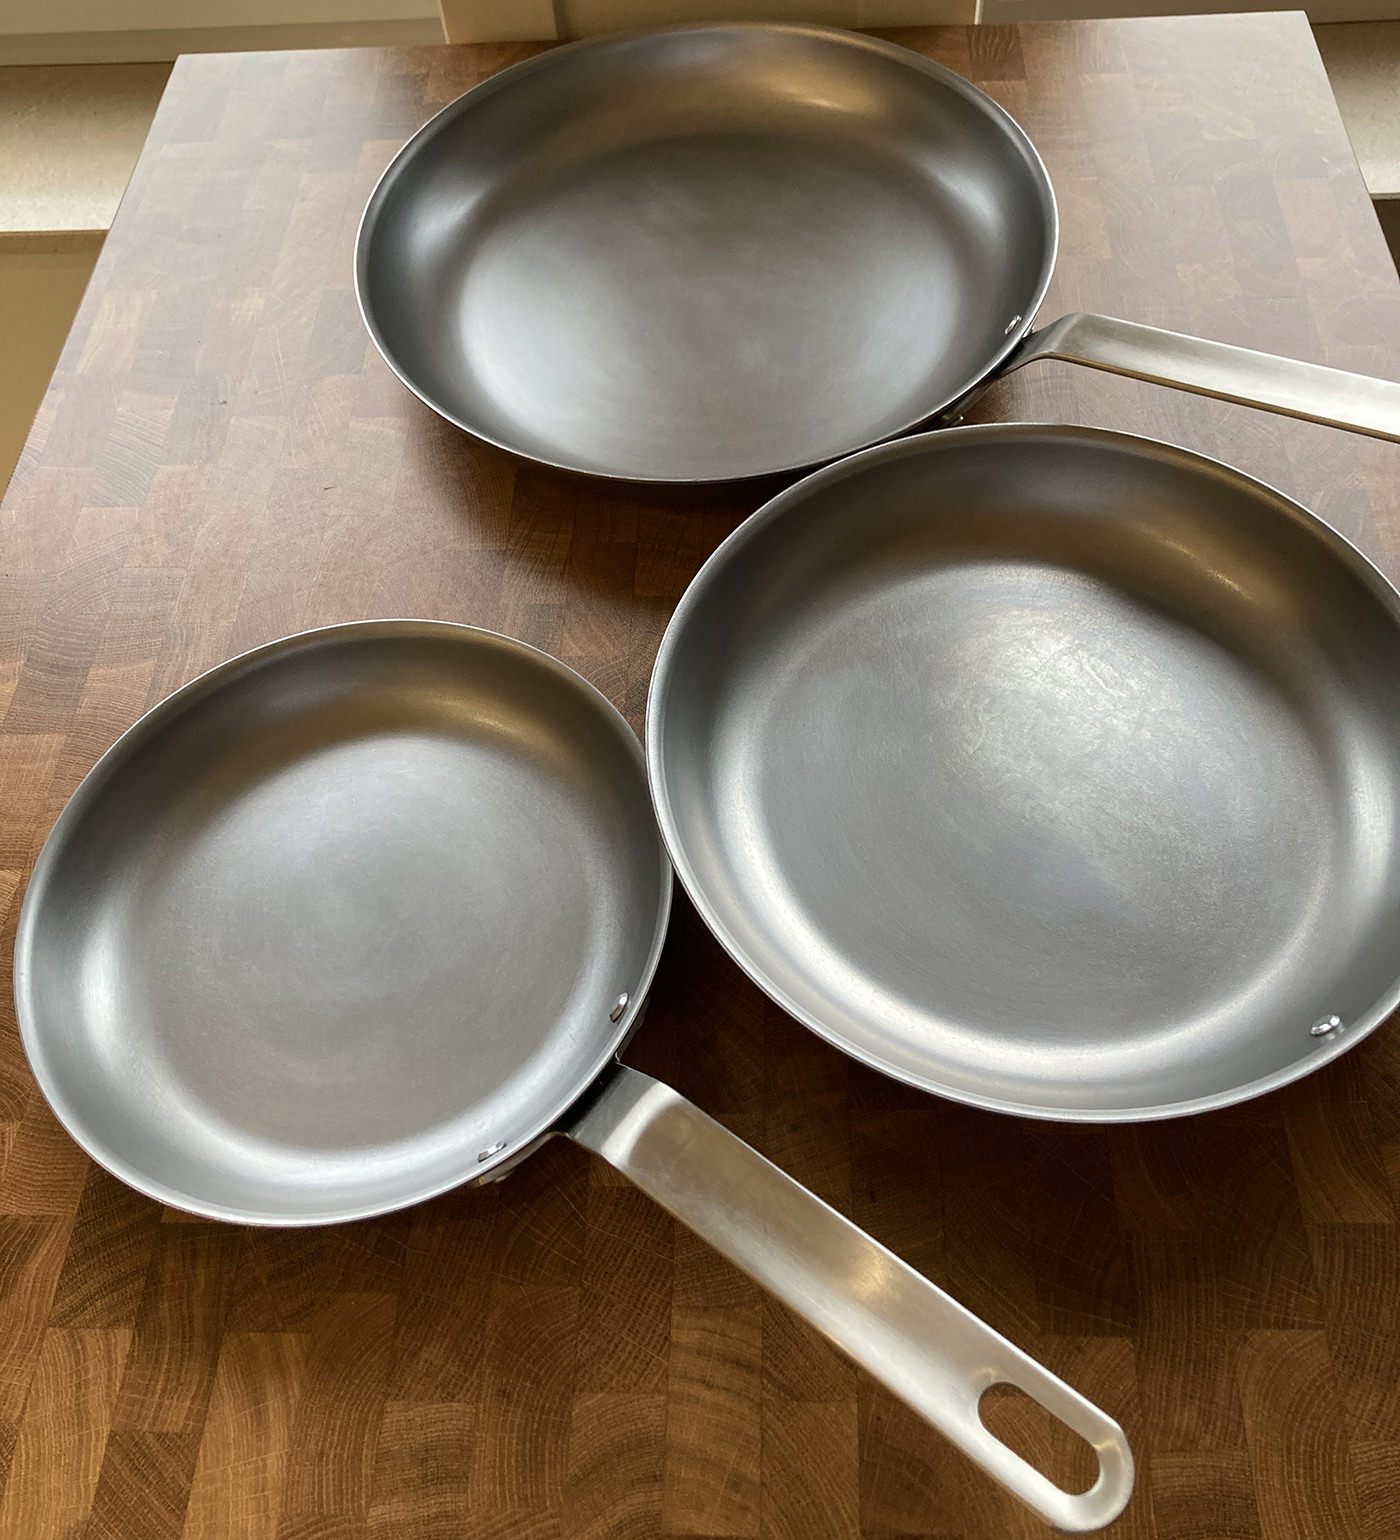 The Misen Carbon Steel Pan washed